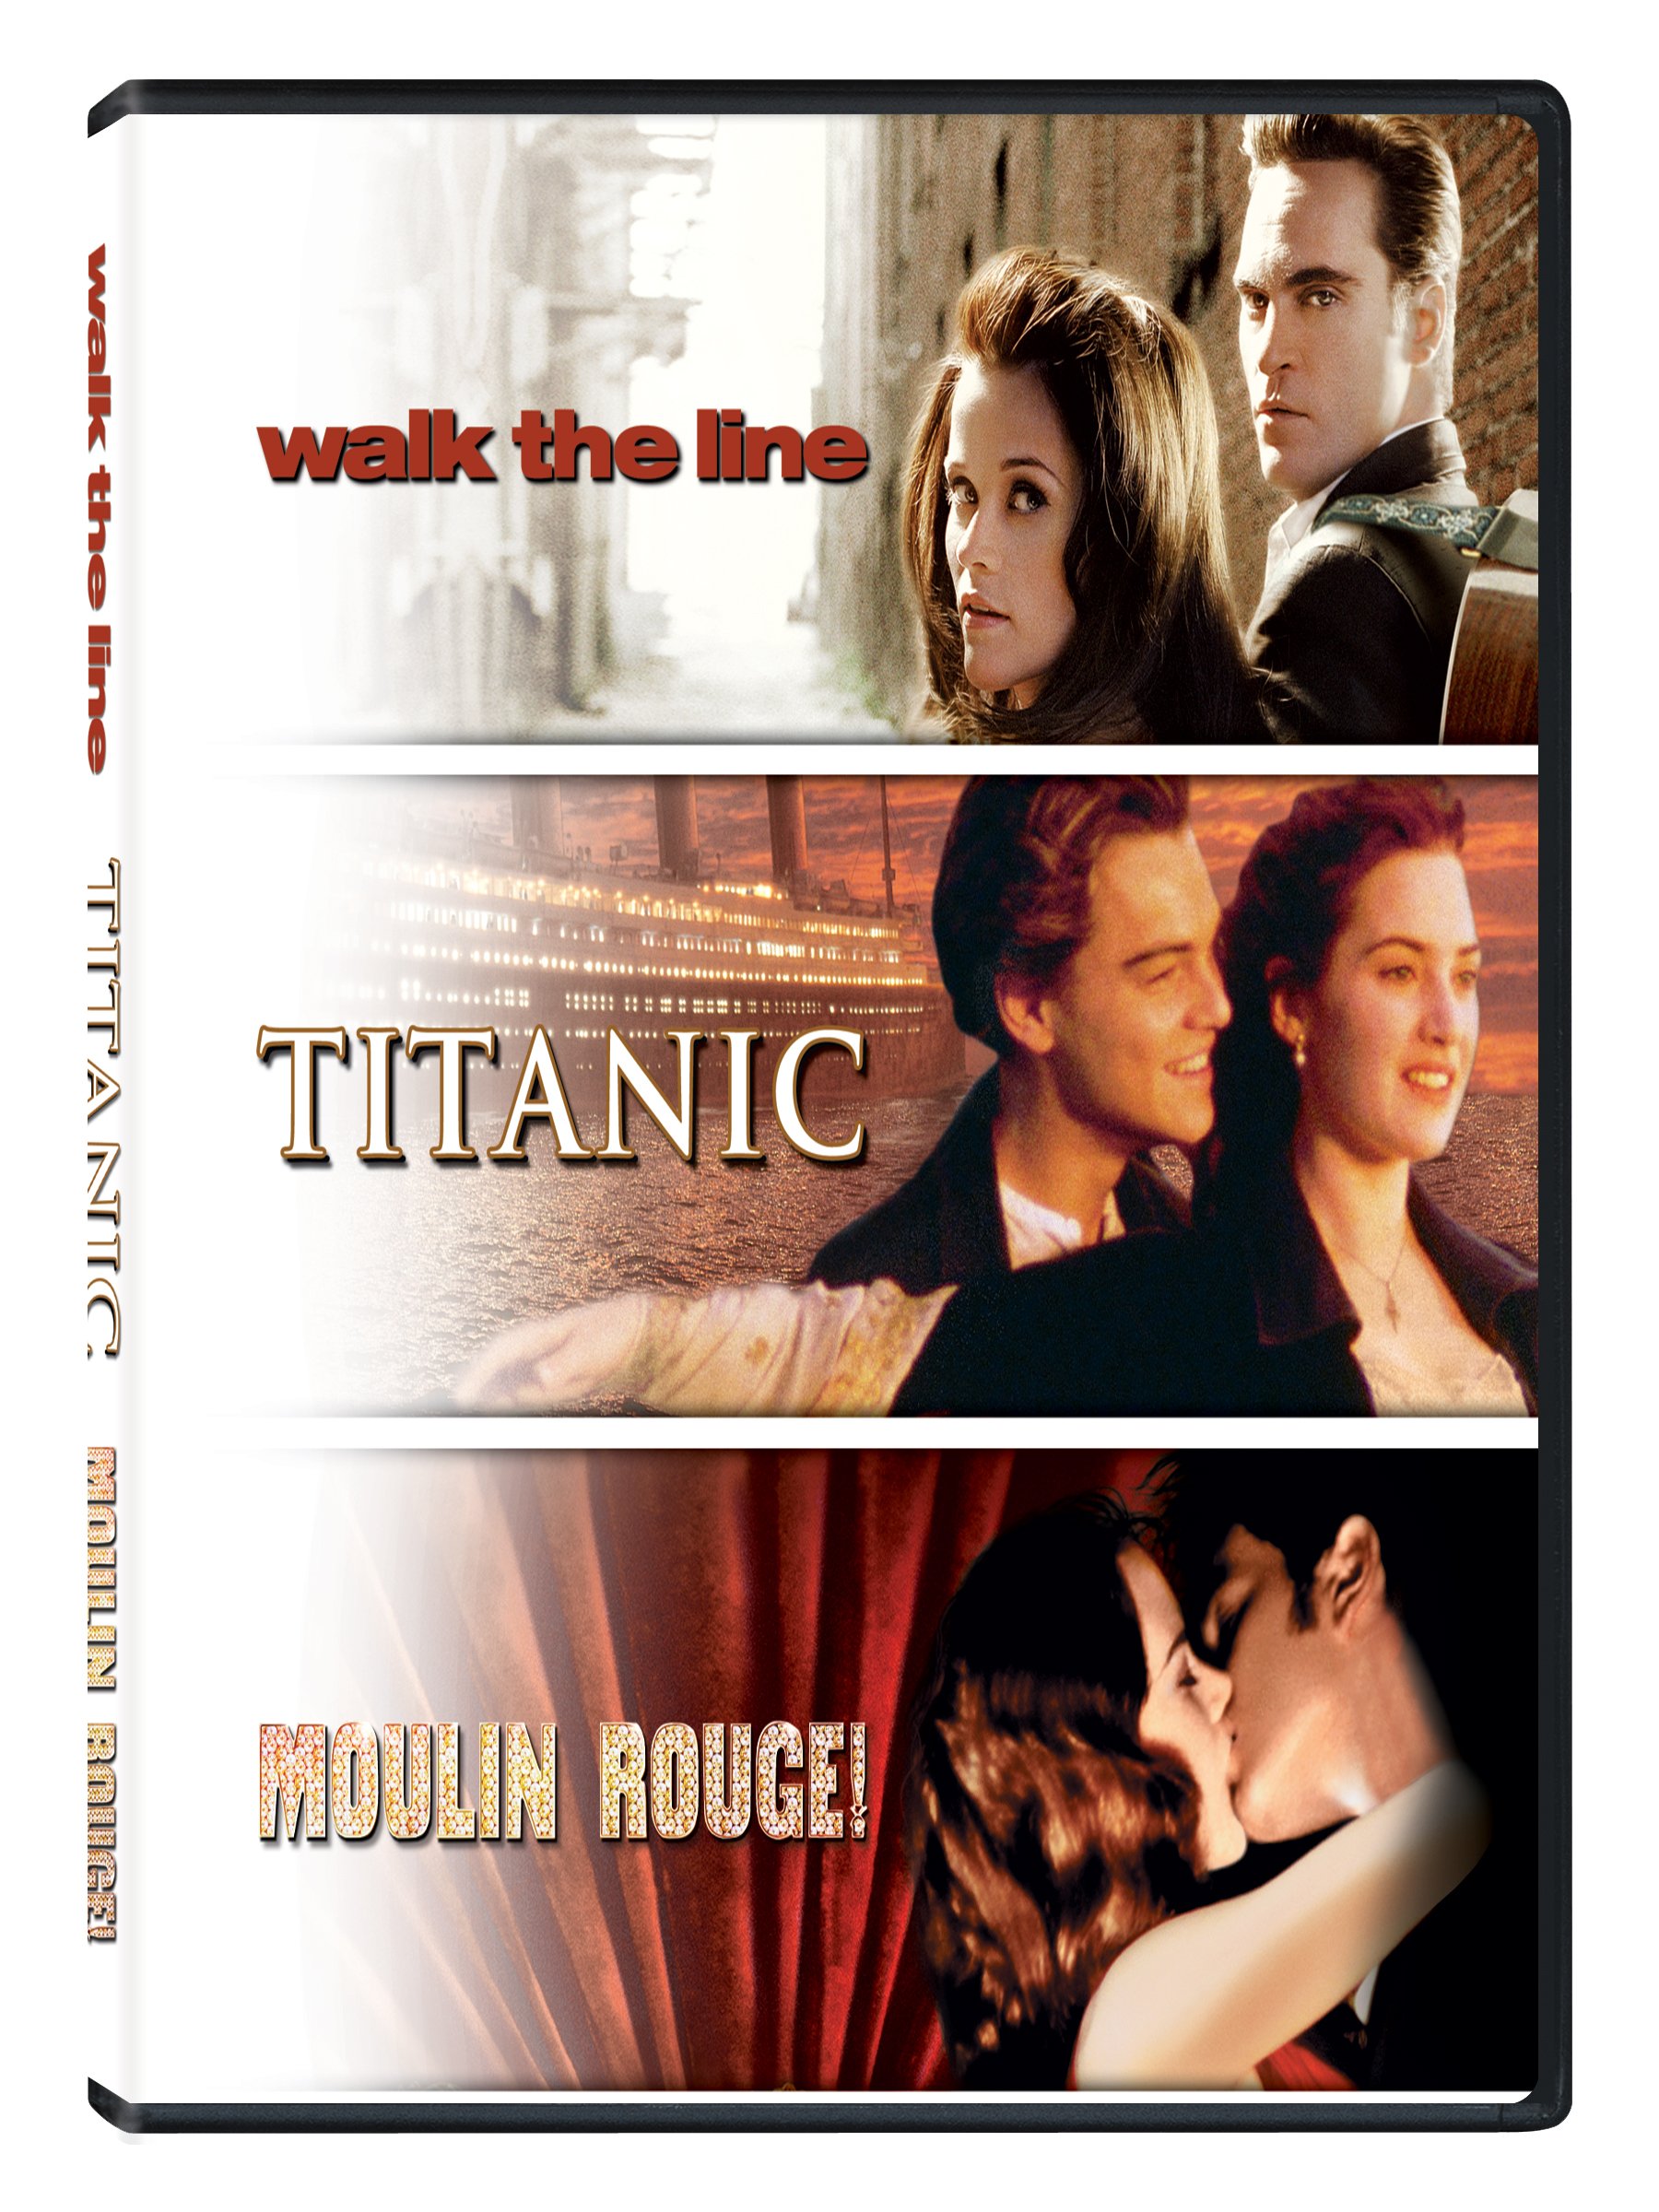 3-movies-collection-walk-the-line-titanic-1997-moulin-rouge-mov